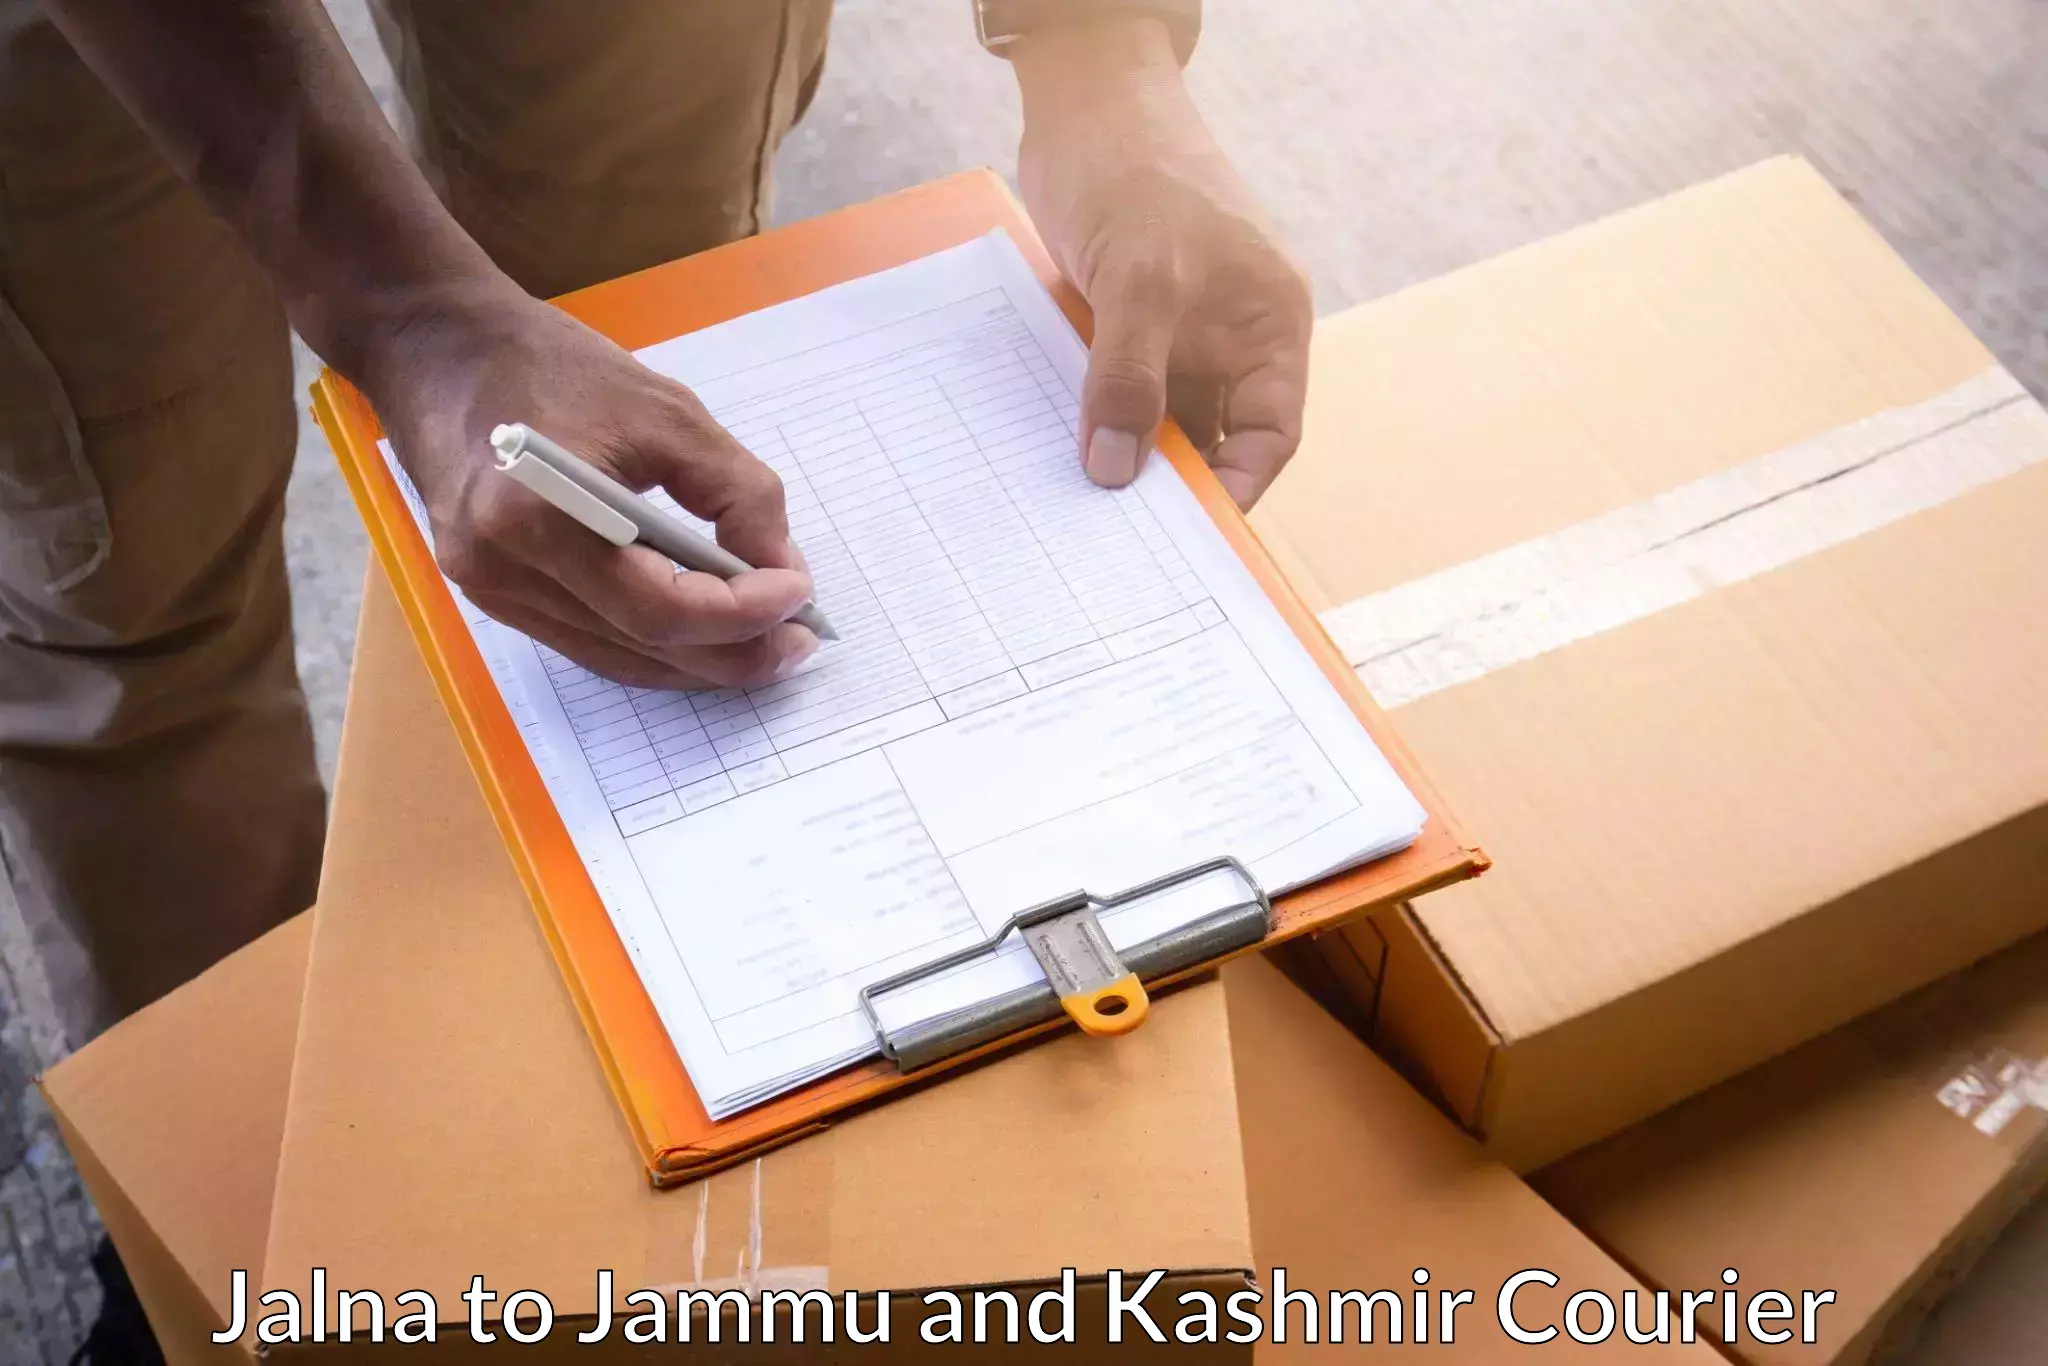 Parcel handling and care in Jalna to Jammu